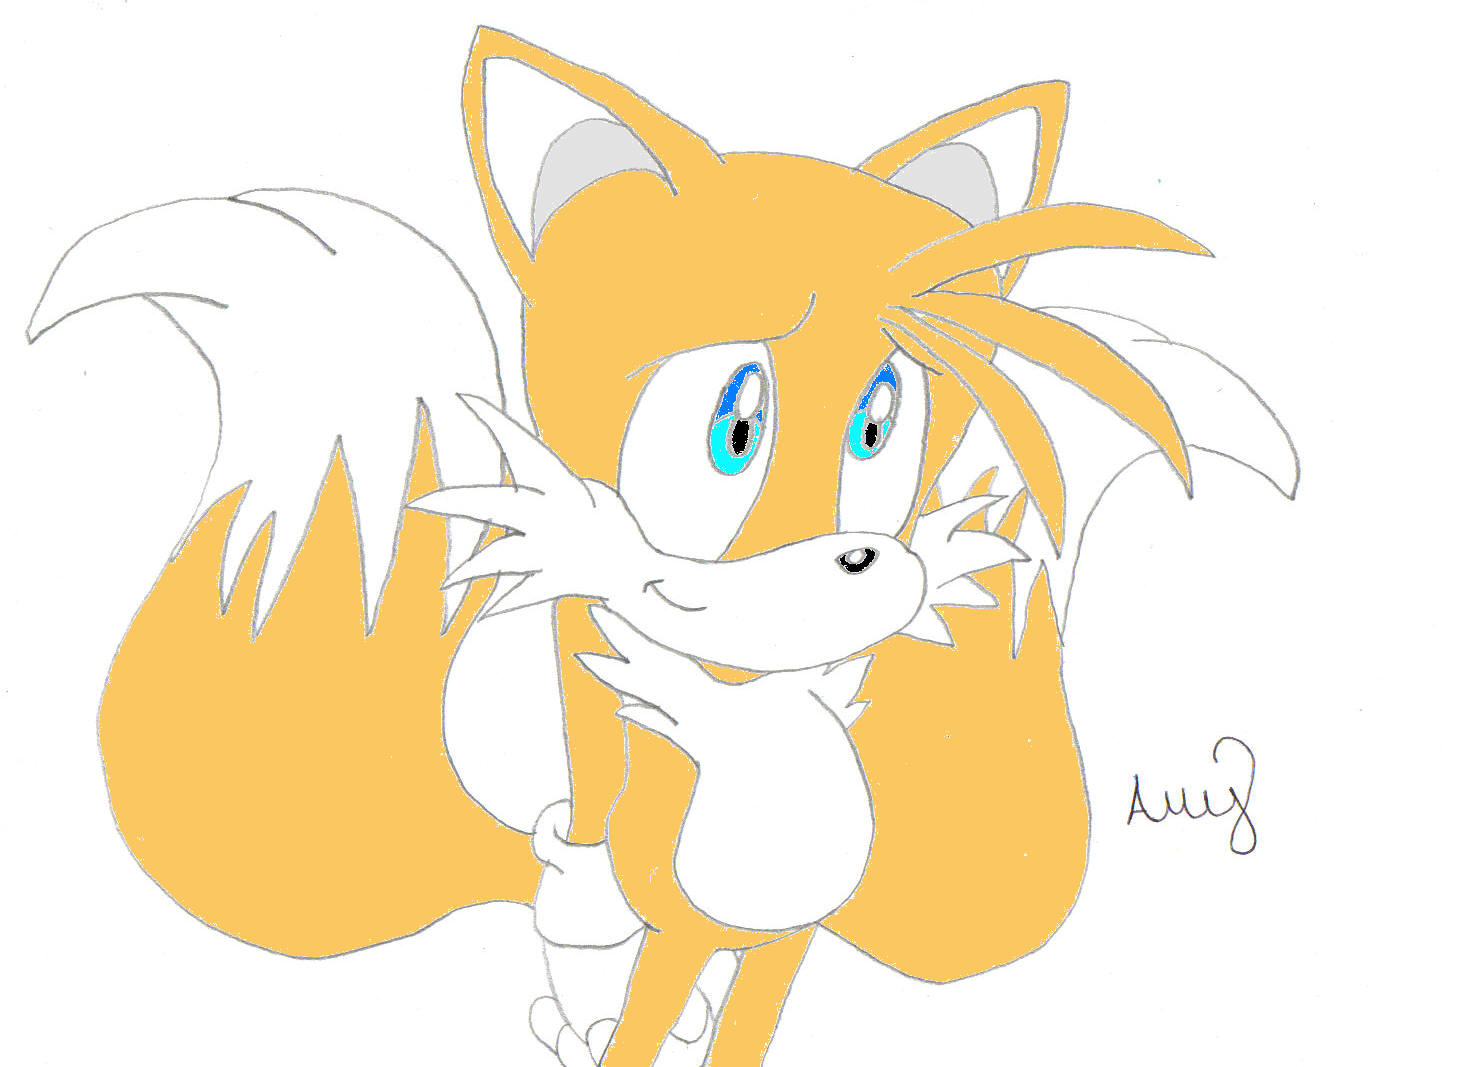 Miles "Tails" Prower (Remade pic) by Amyfan2004